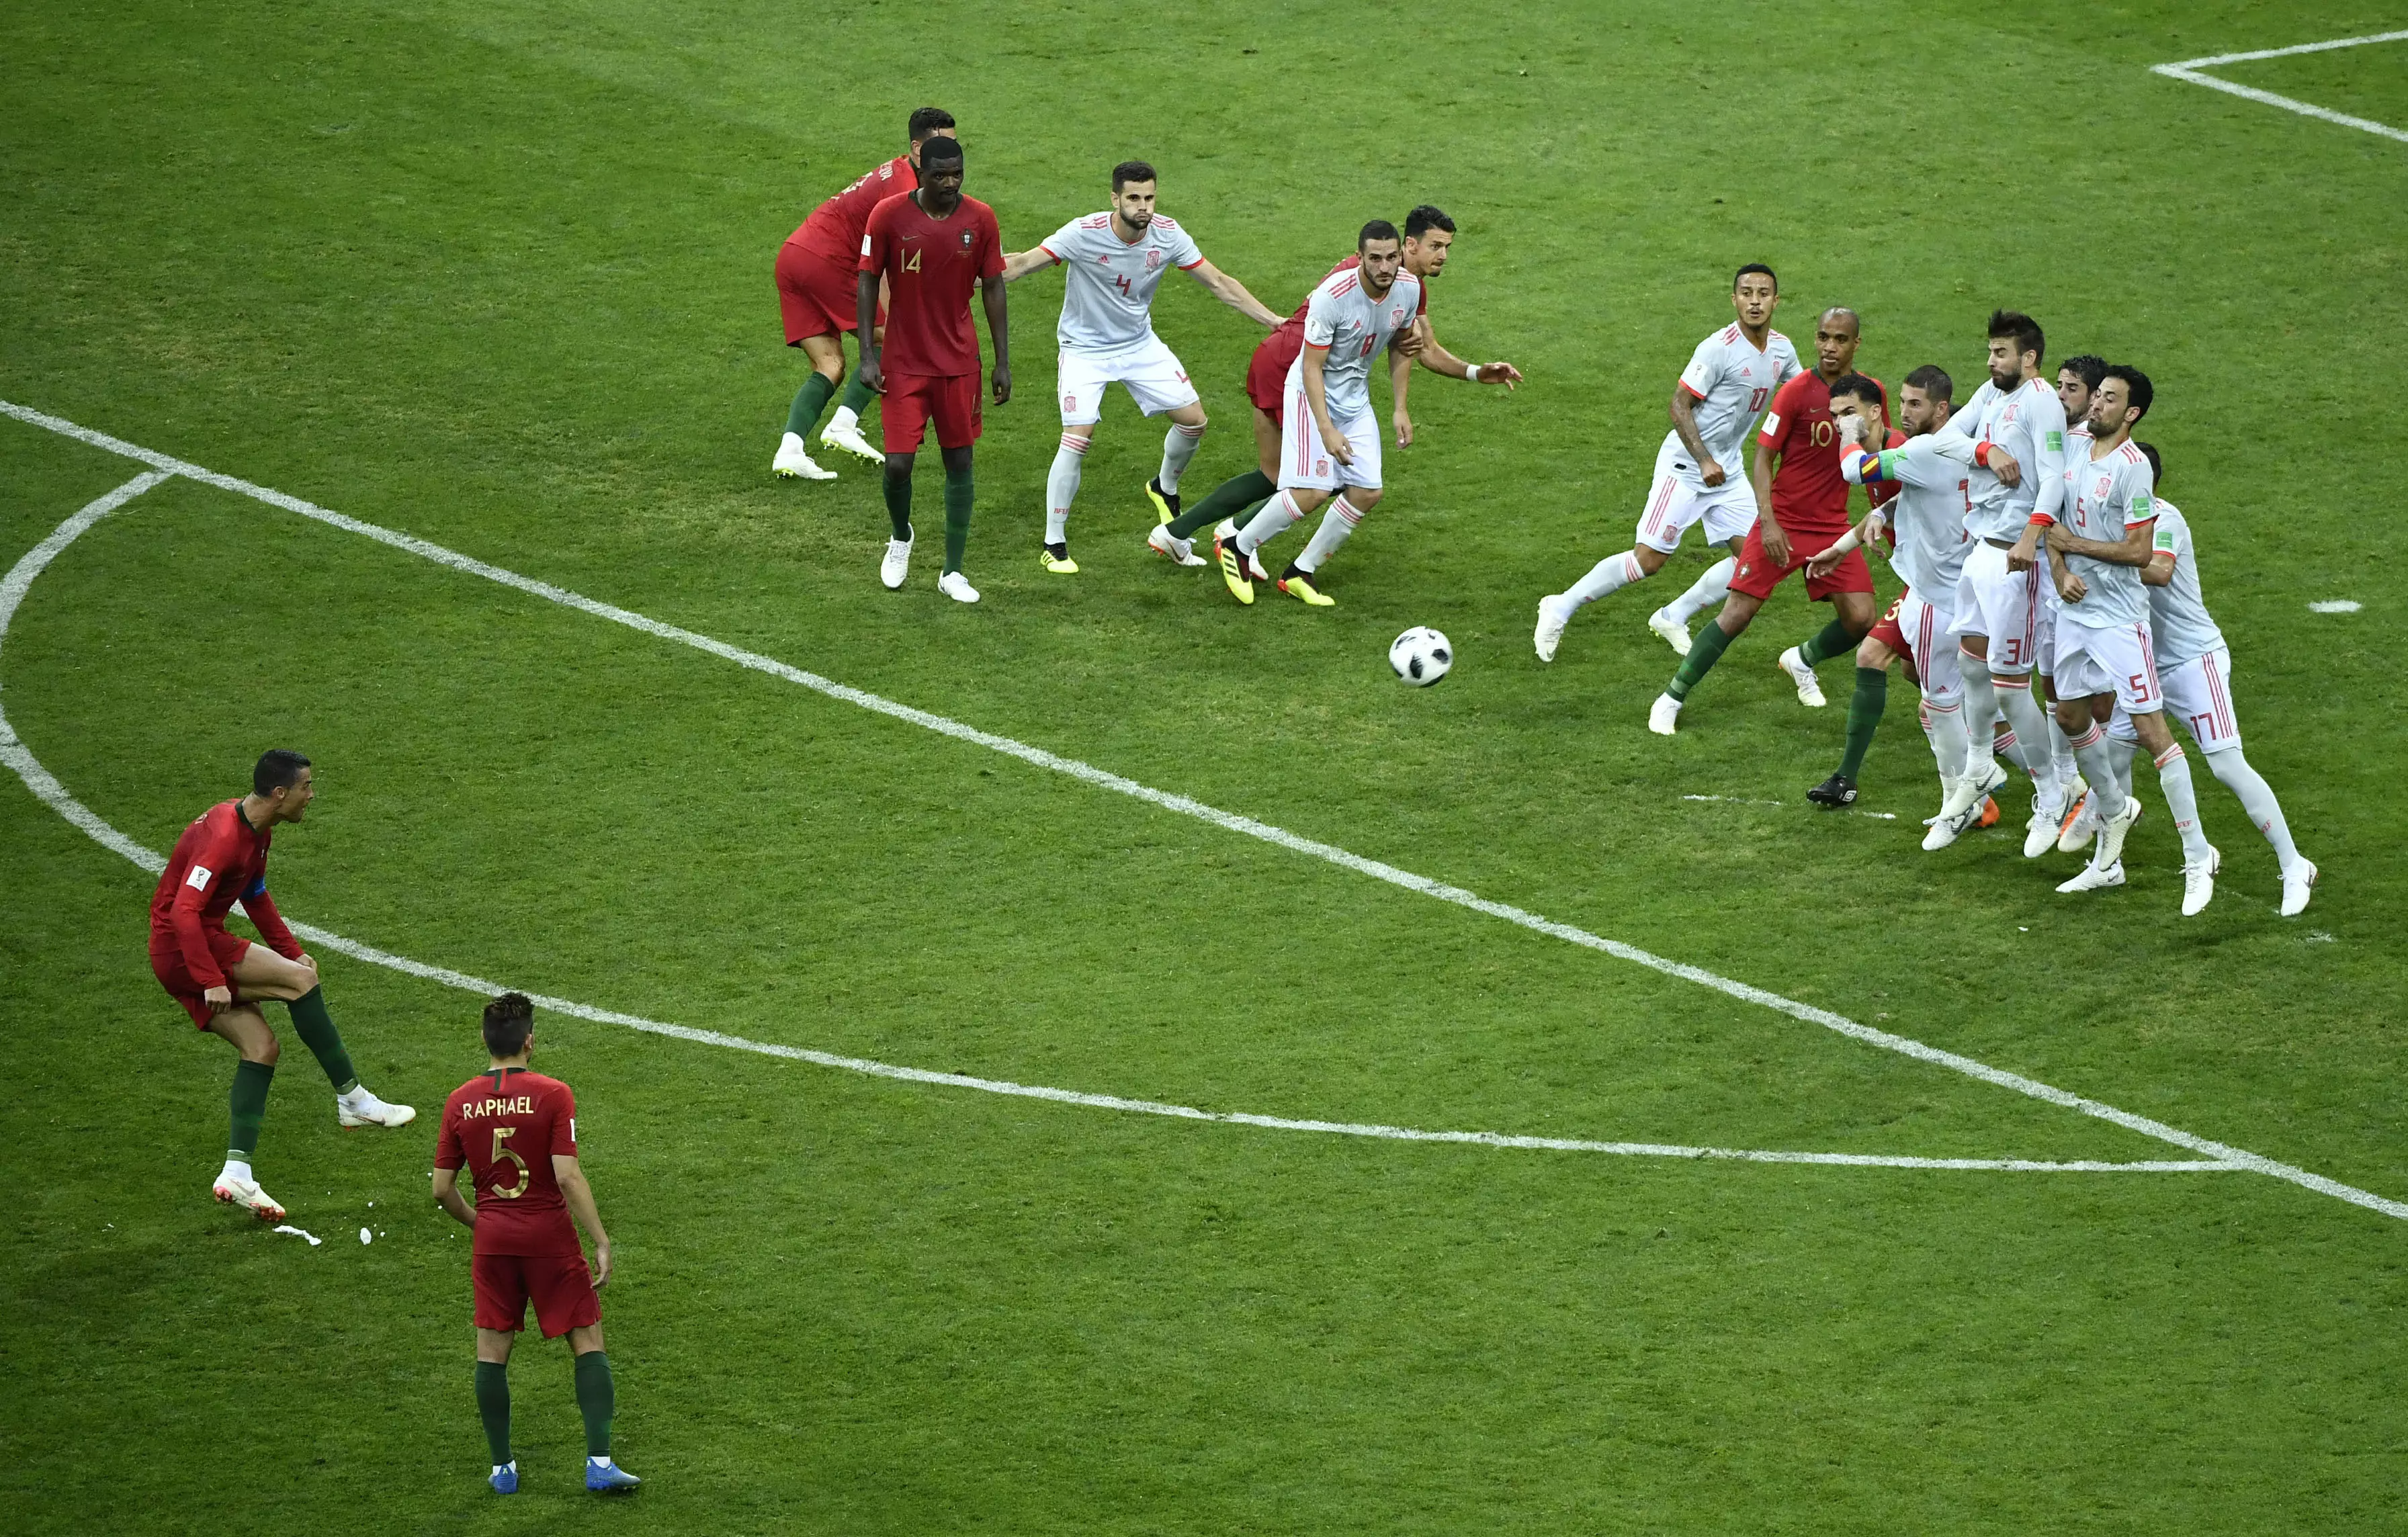 Ronaldo hits an incredible free kick to level things at 3-3 with Spain. Image: PA Images